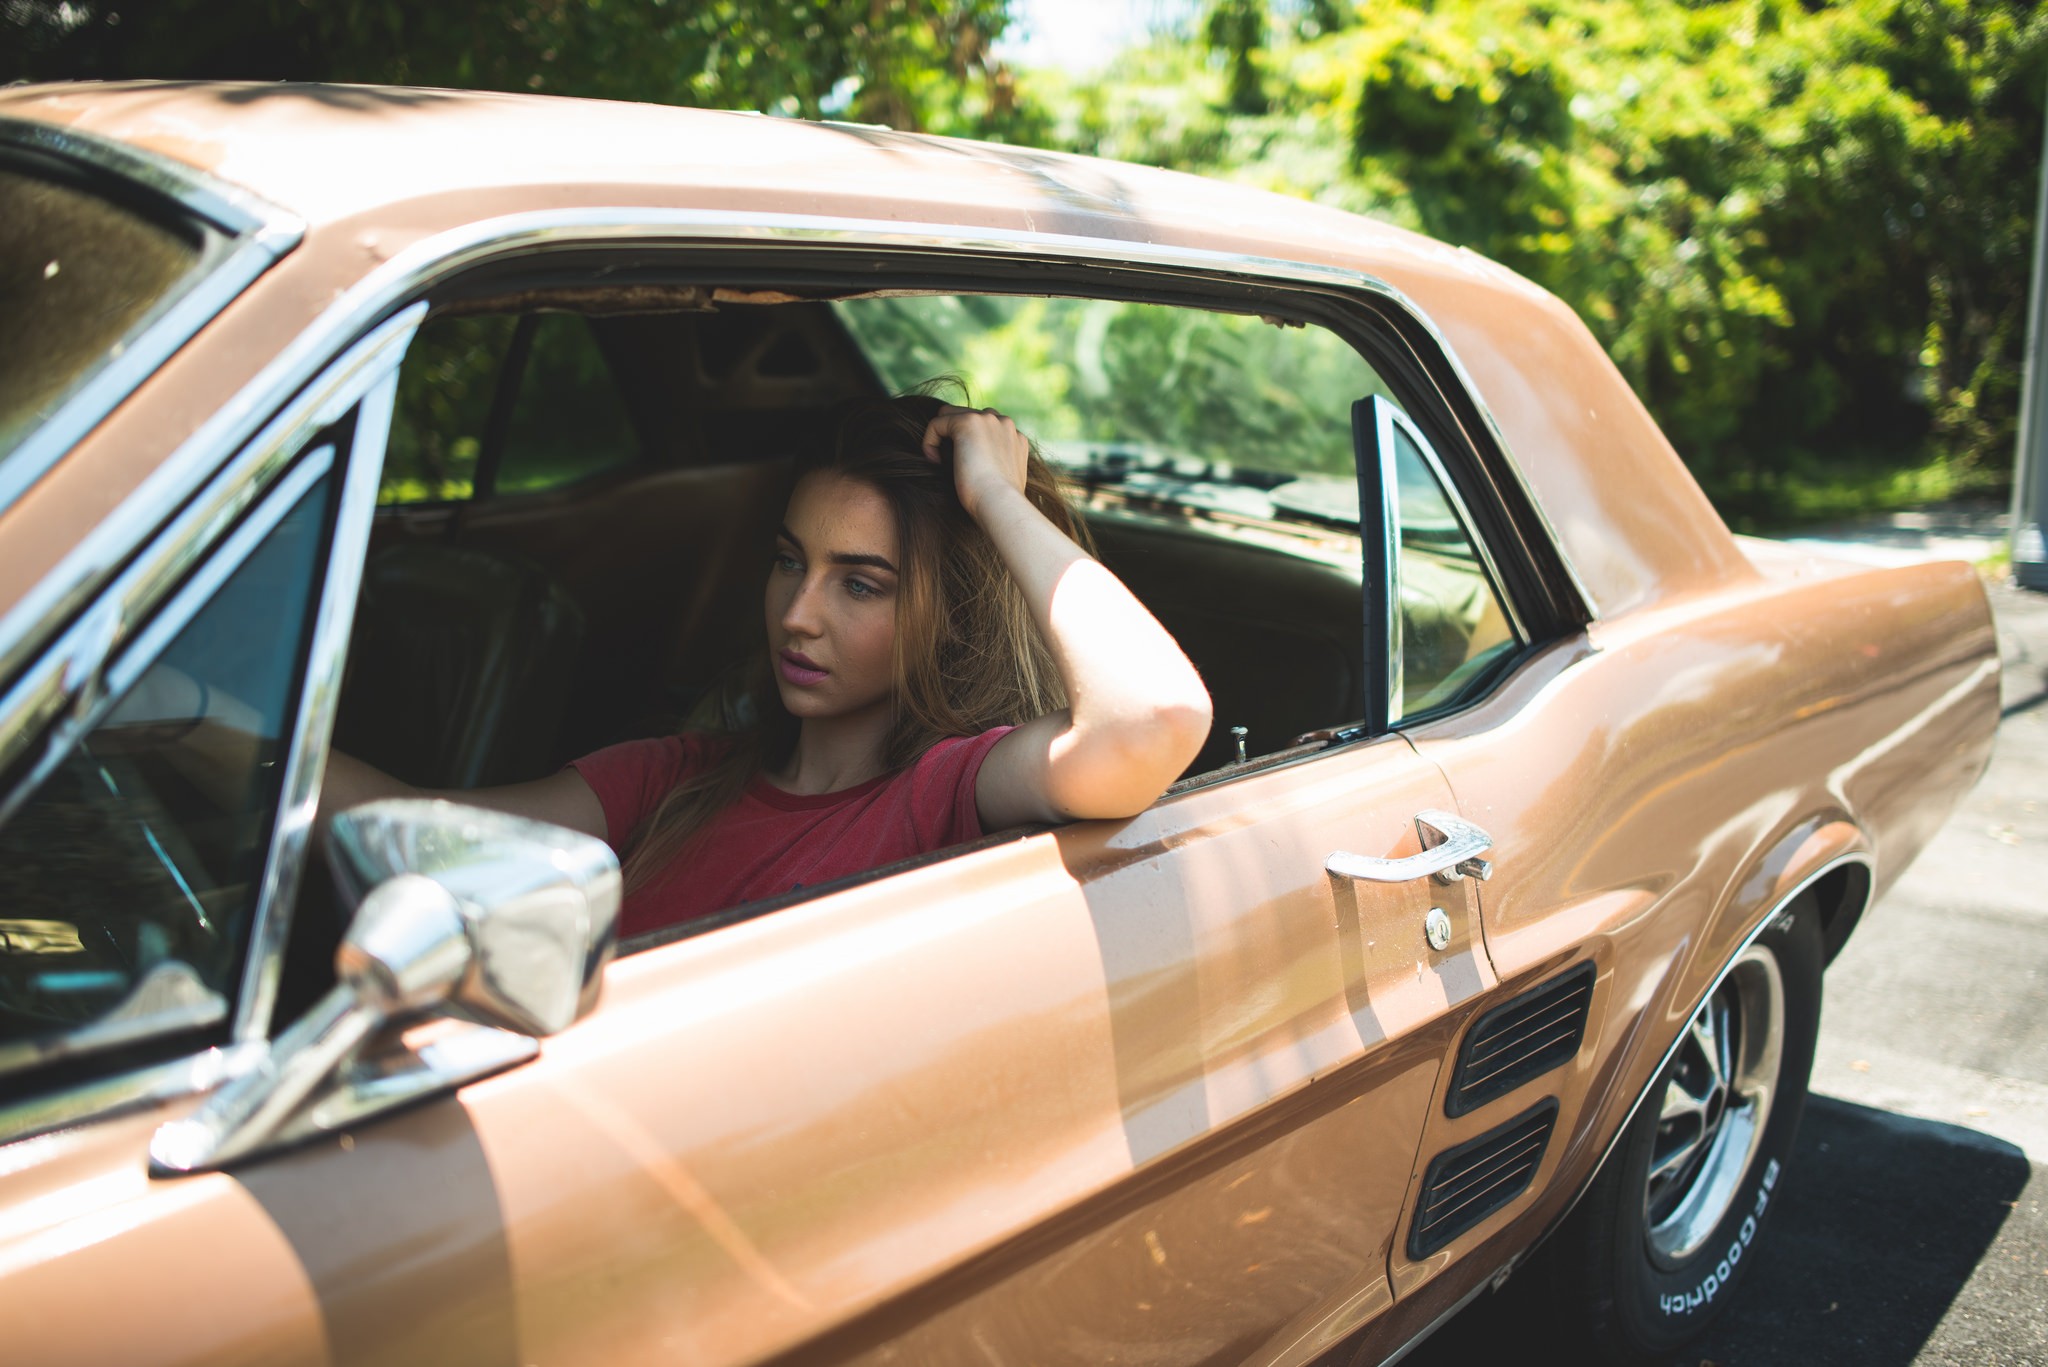 People 2048x1367 women women with cars sitting hands on head looking away blonde face Ford Mustang driving car vehicle sitting in the car model Ford muscle cars American cars